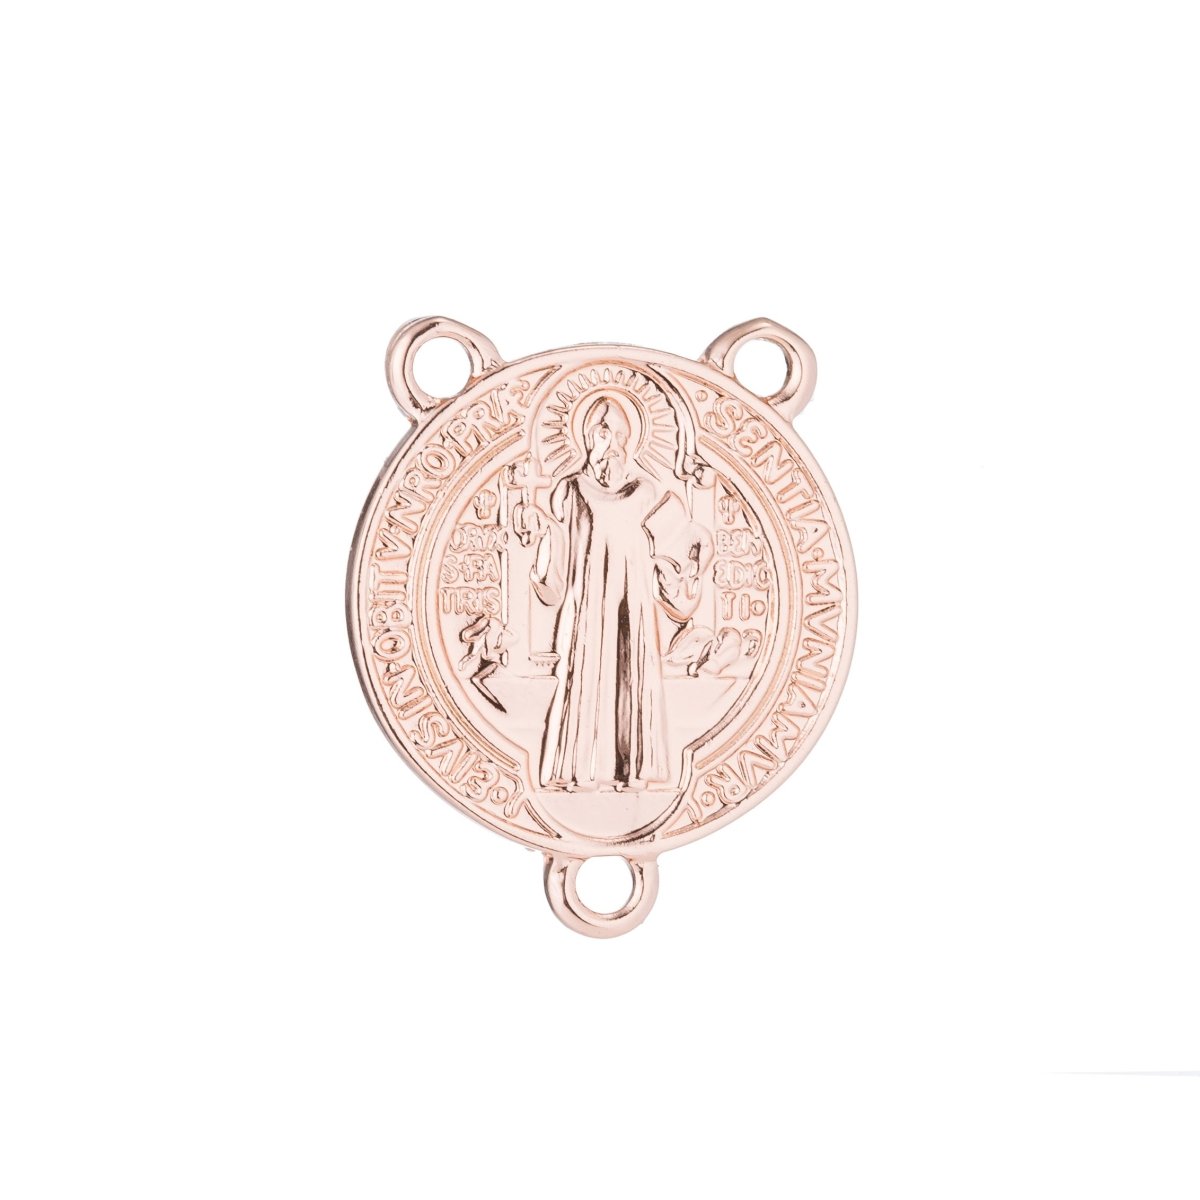 Rose Gold Rosary Centerpiece, Double Sided, Saint, Divine, Cross, Rosary Making Supply, Necklace Pendant, Findings for Jewelry Making F-190 - DLUXCA